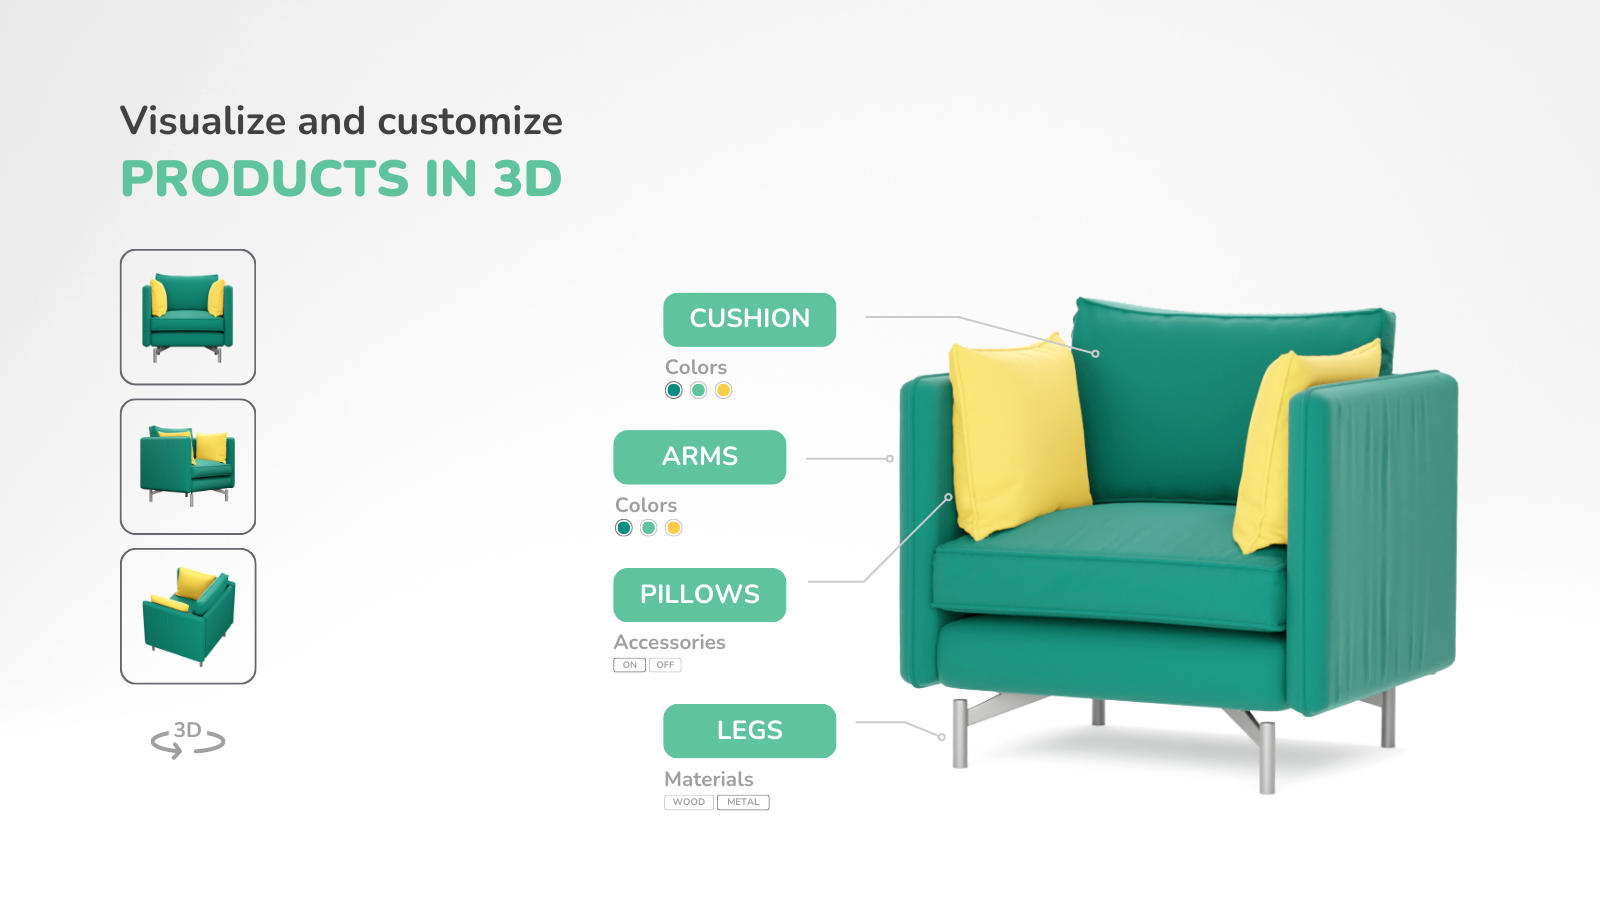 Customize your product in 3D